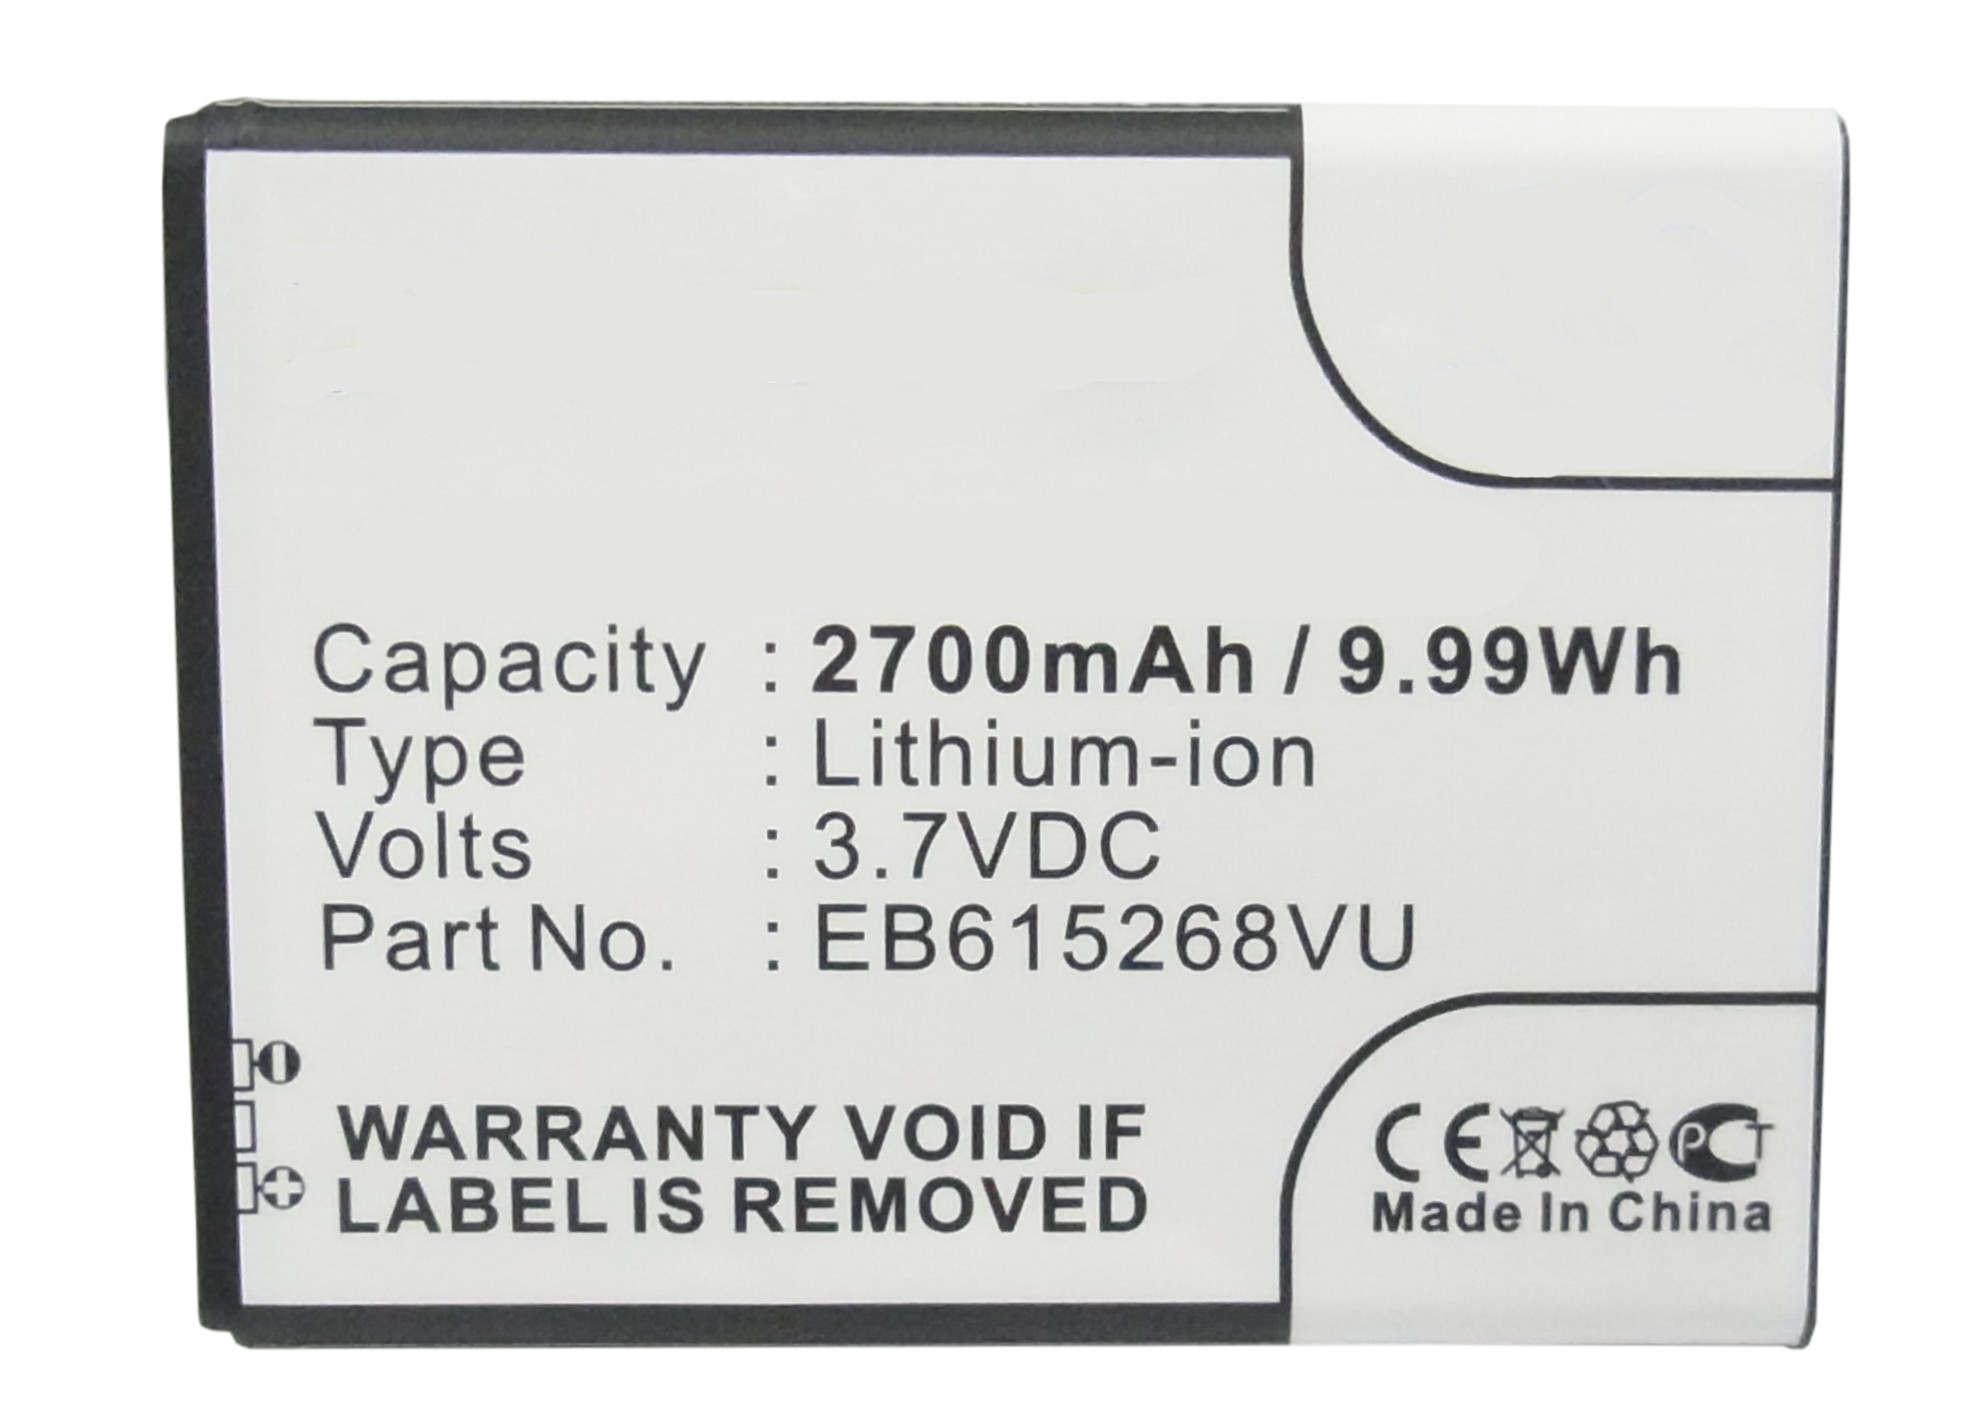 Synergy Digital Cell Phone Battery, Compatiable with AT&T EB615268VA, EB615268VABXAR, EB615268VK, EB615268VU, EB615268VUCST Cell Phone Battery (3.7V, Li-ion, 2700mAh)